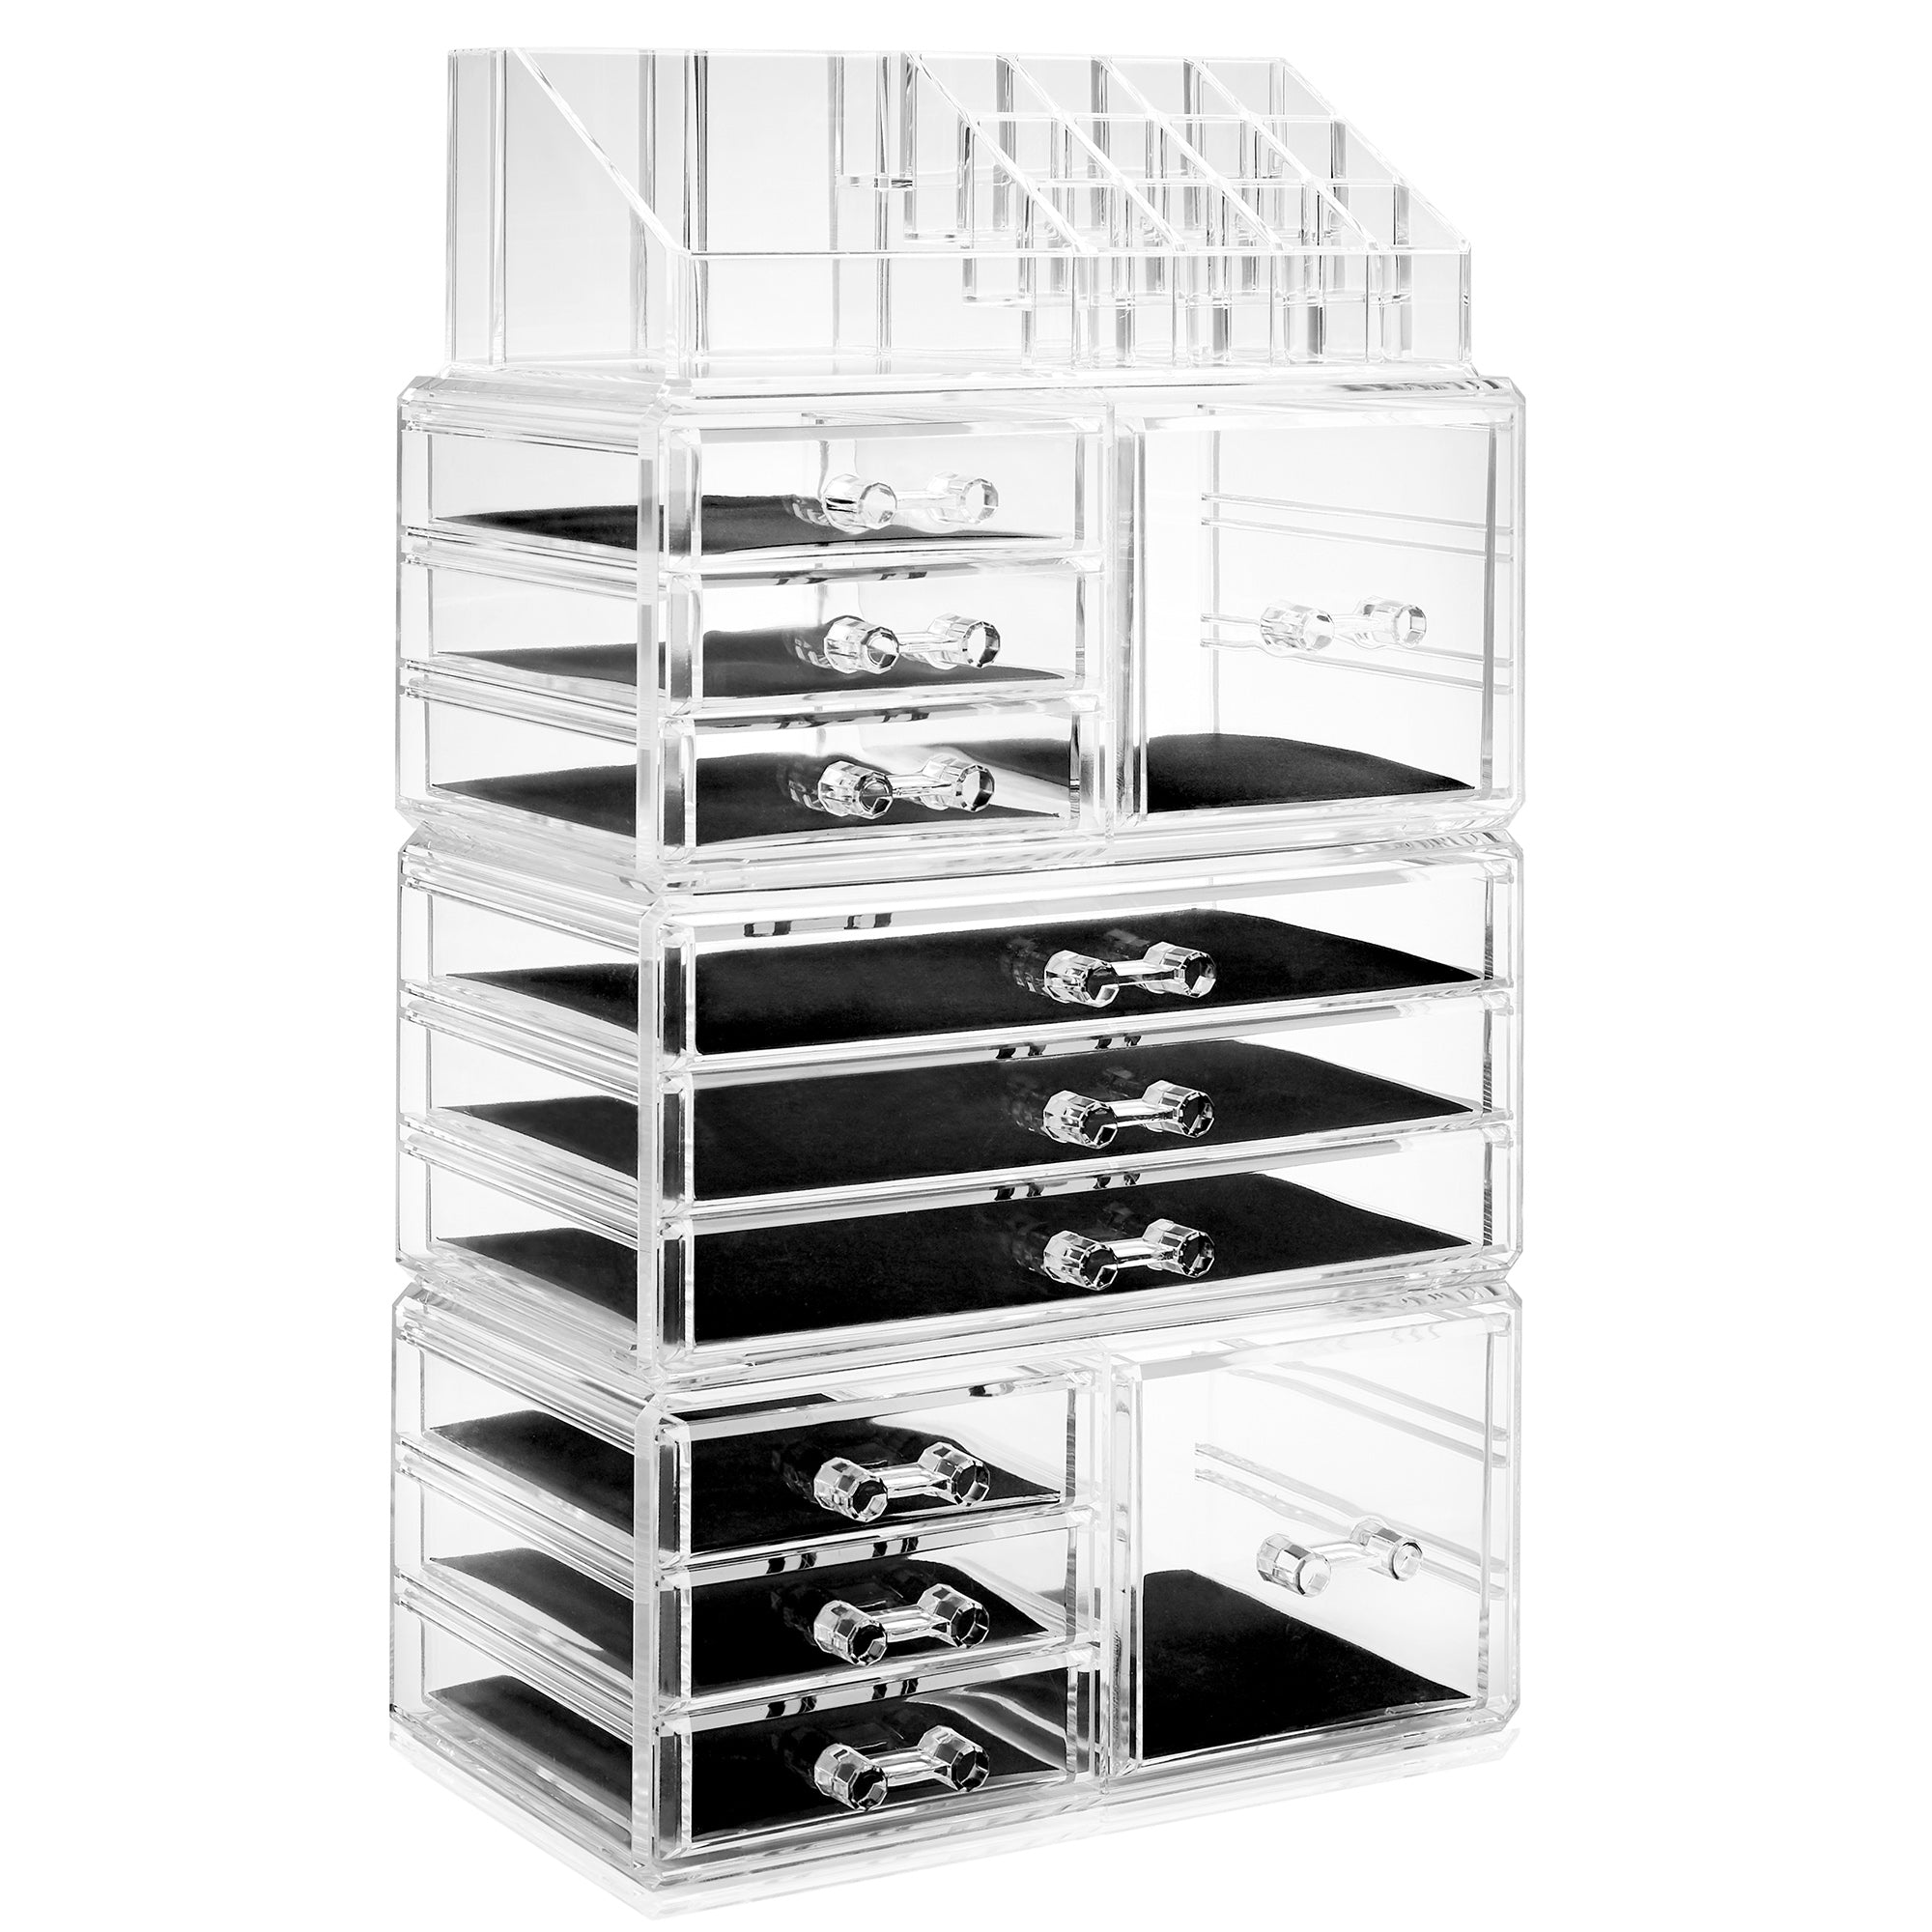 SpaceHacks 2 Pack Stackable Makeup Organizer and Storage, Acrylic